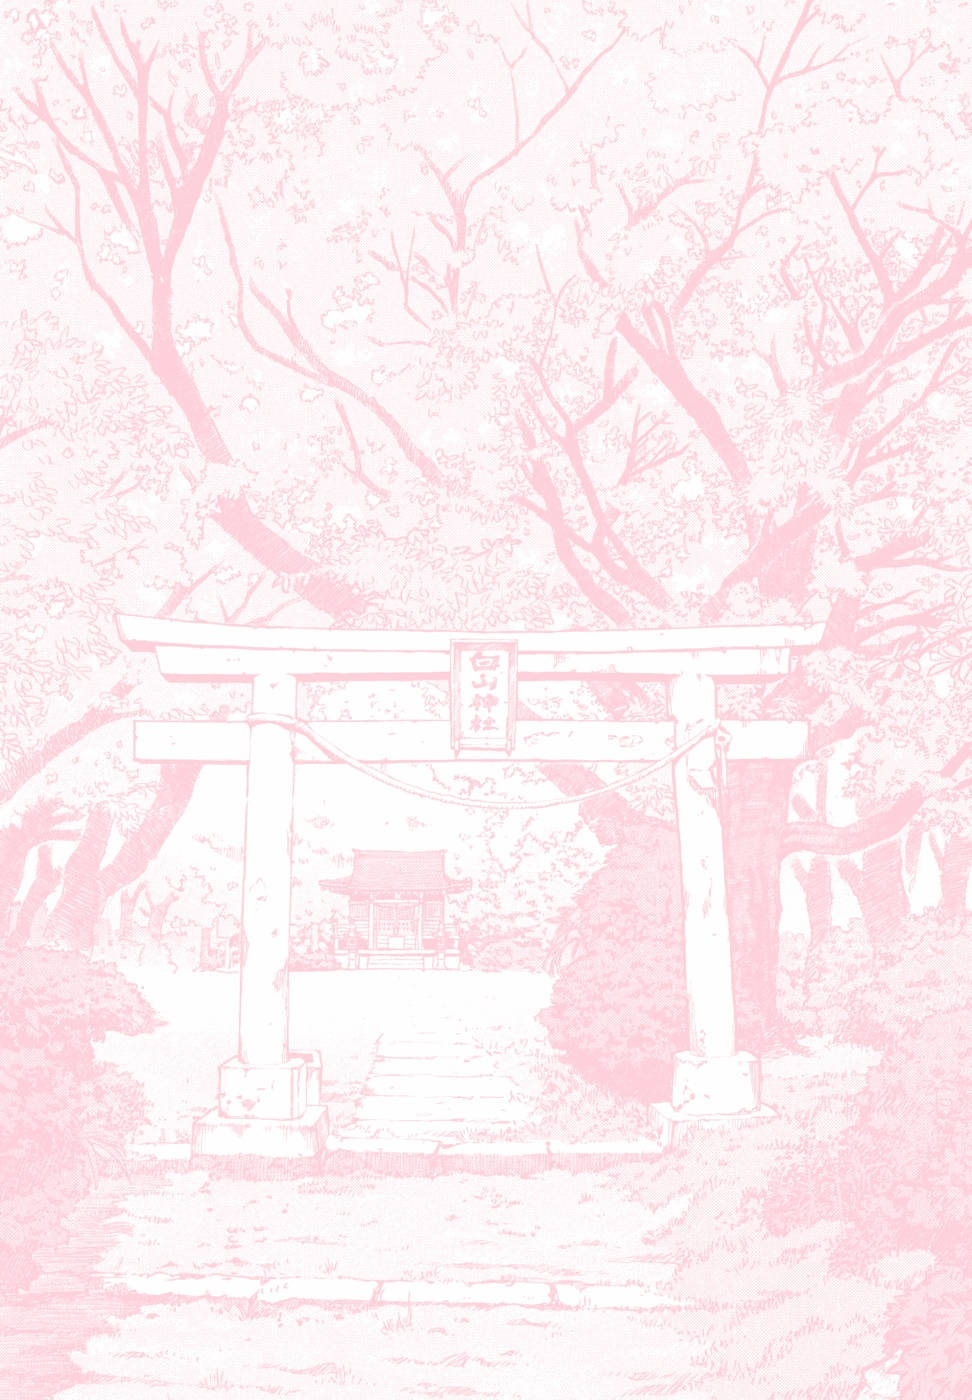 Aesthetic Pink Iphone Torii With Cherry Blossom Trees Wallpaper